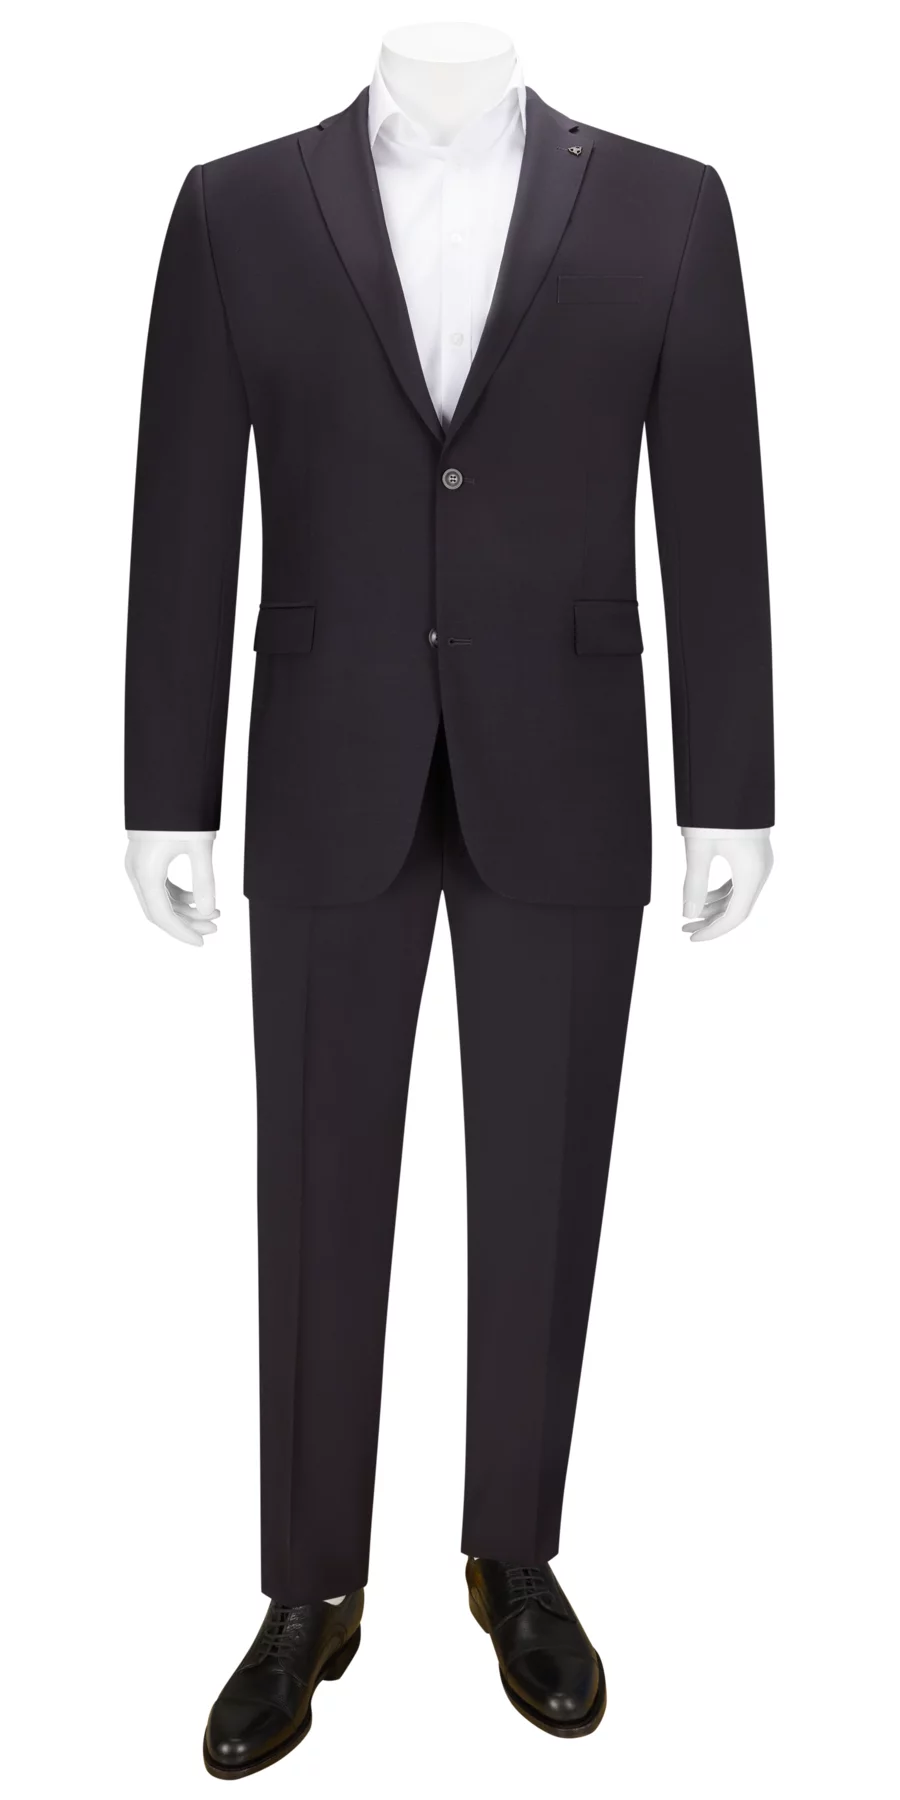 Big & Tall Suits, Mens Plus Size Suits